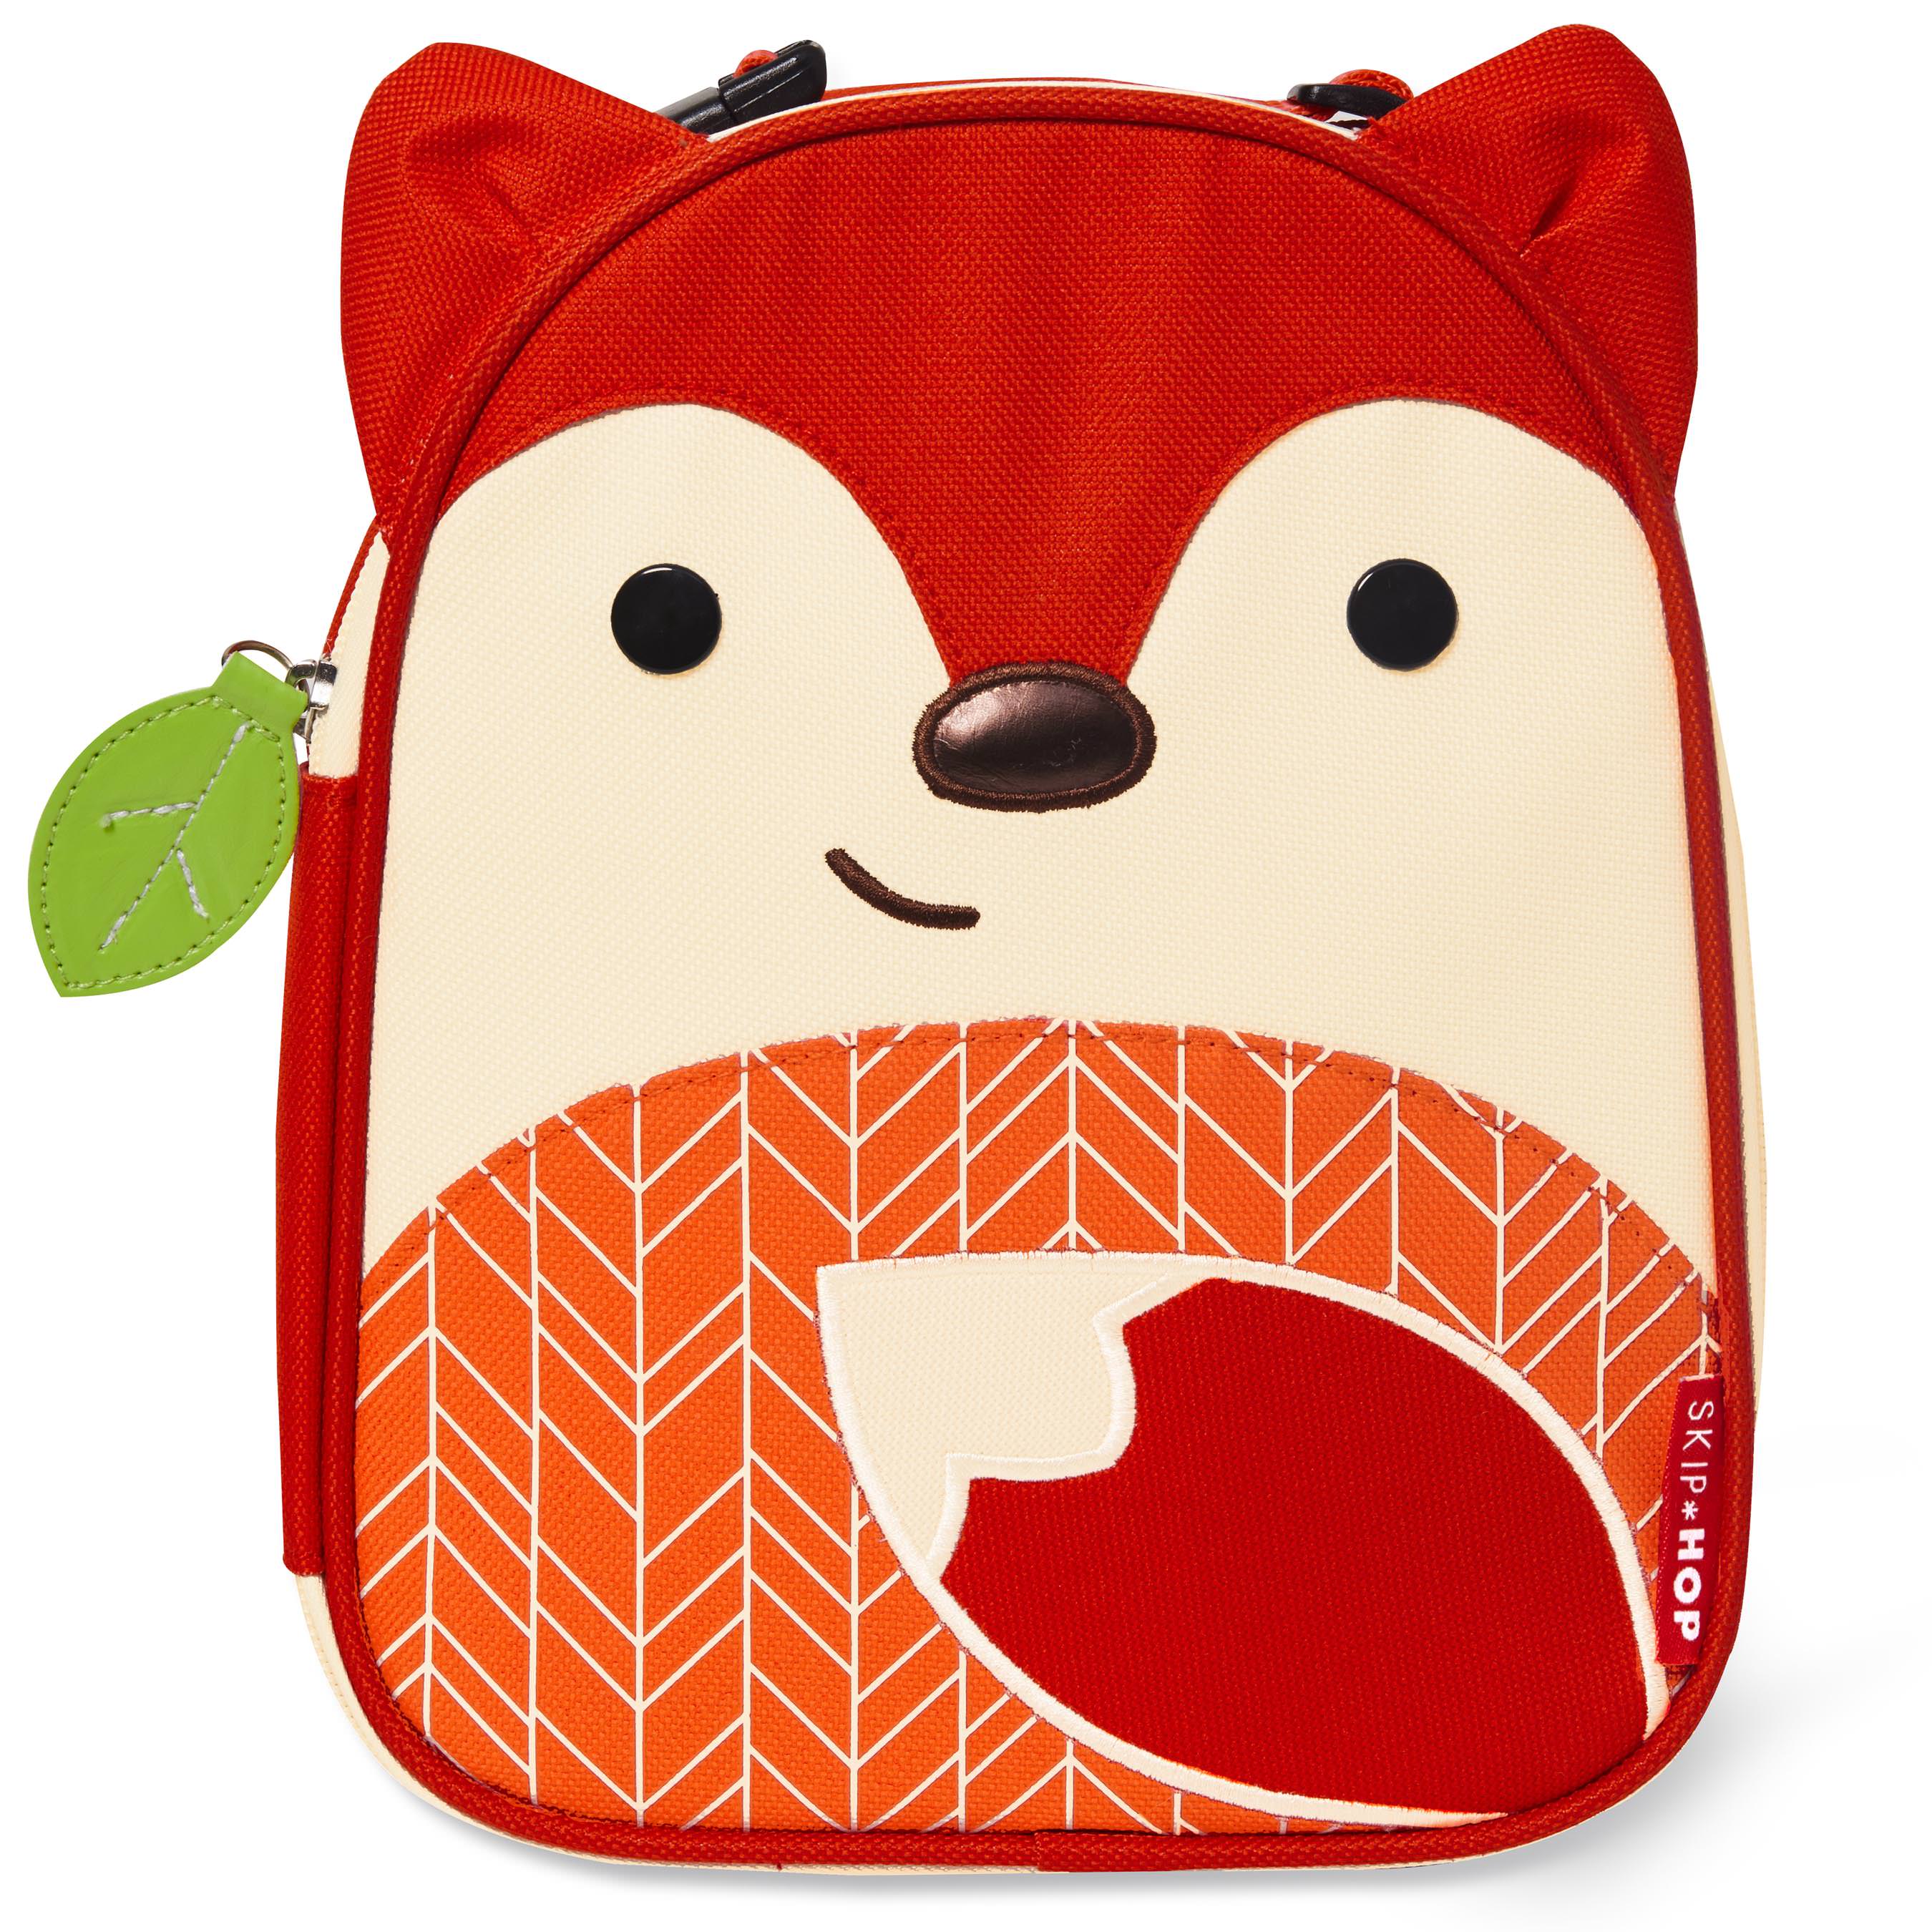 Skip Hop Zoo Lunchie Insulated Lunch Bag, Fox - image 2 of 7